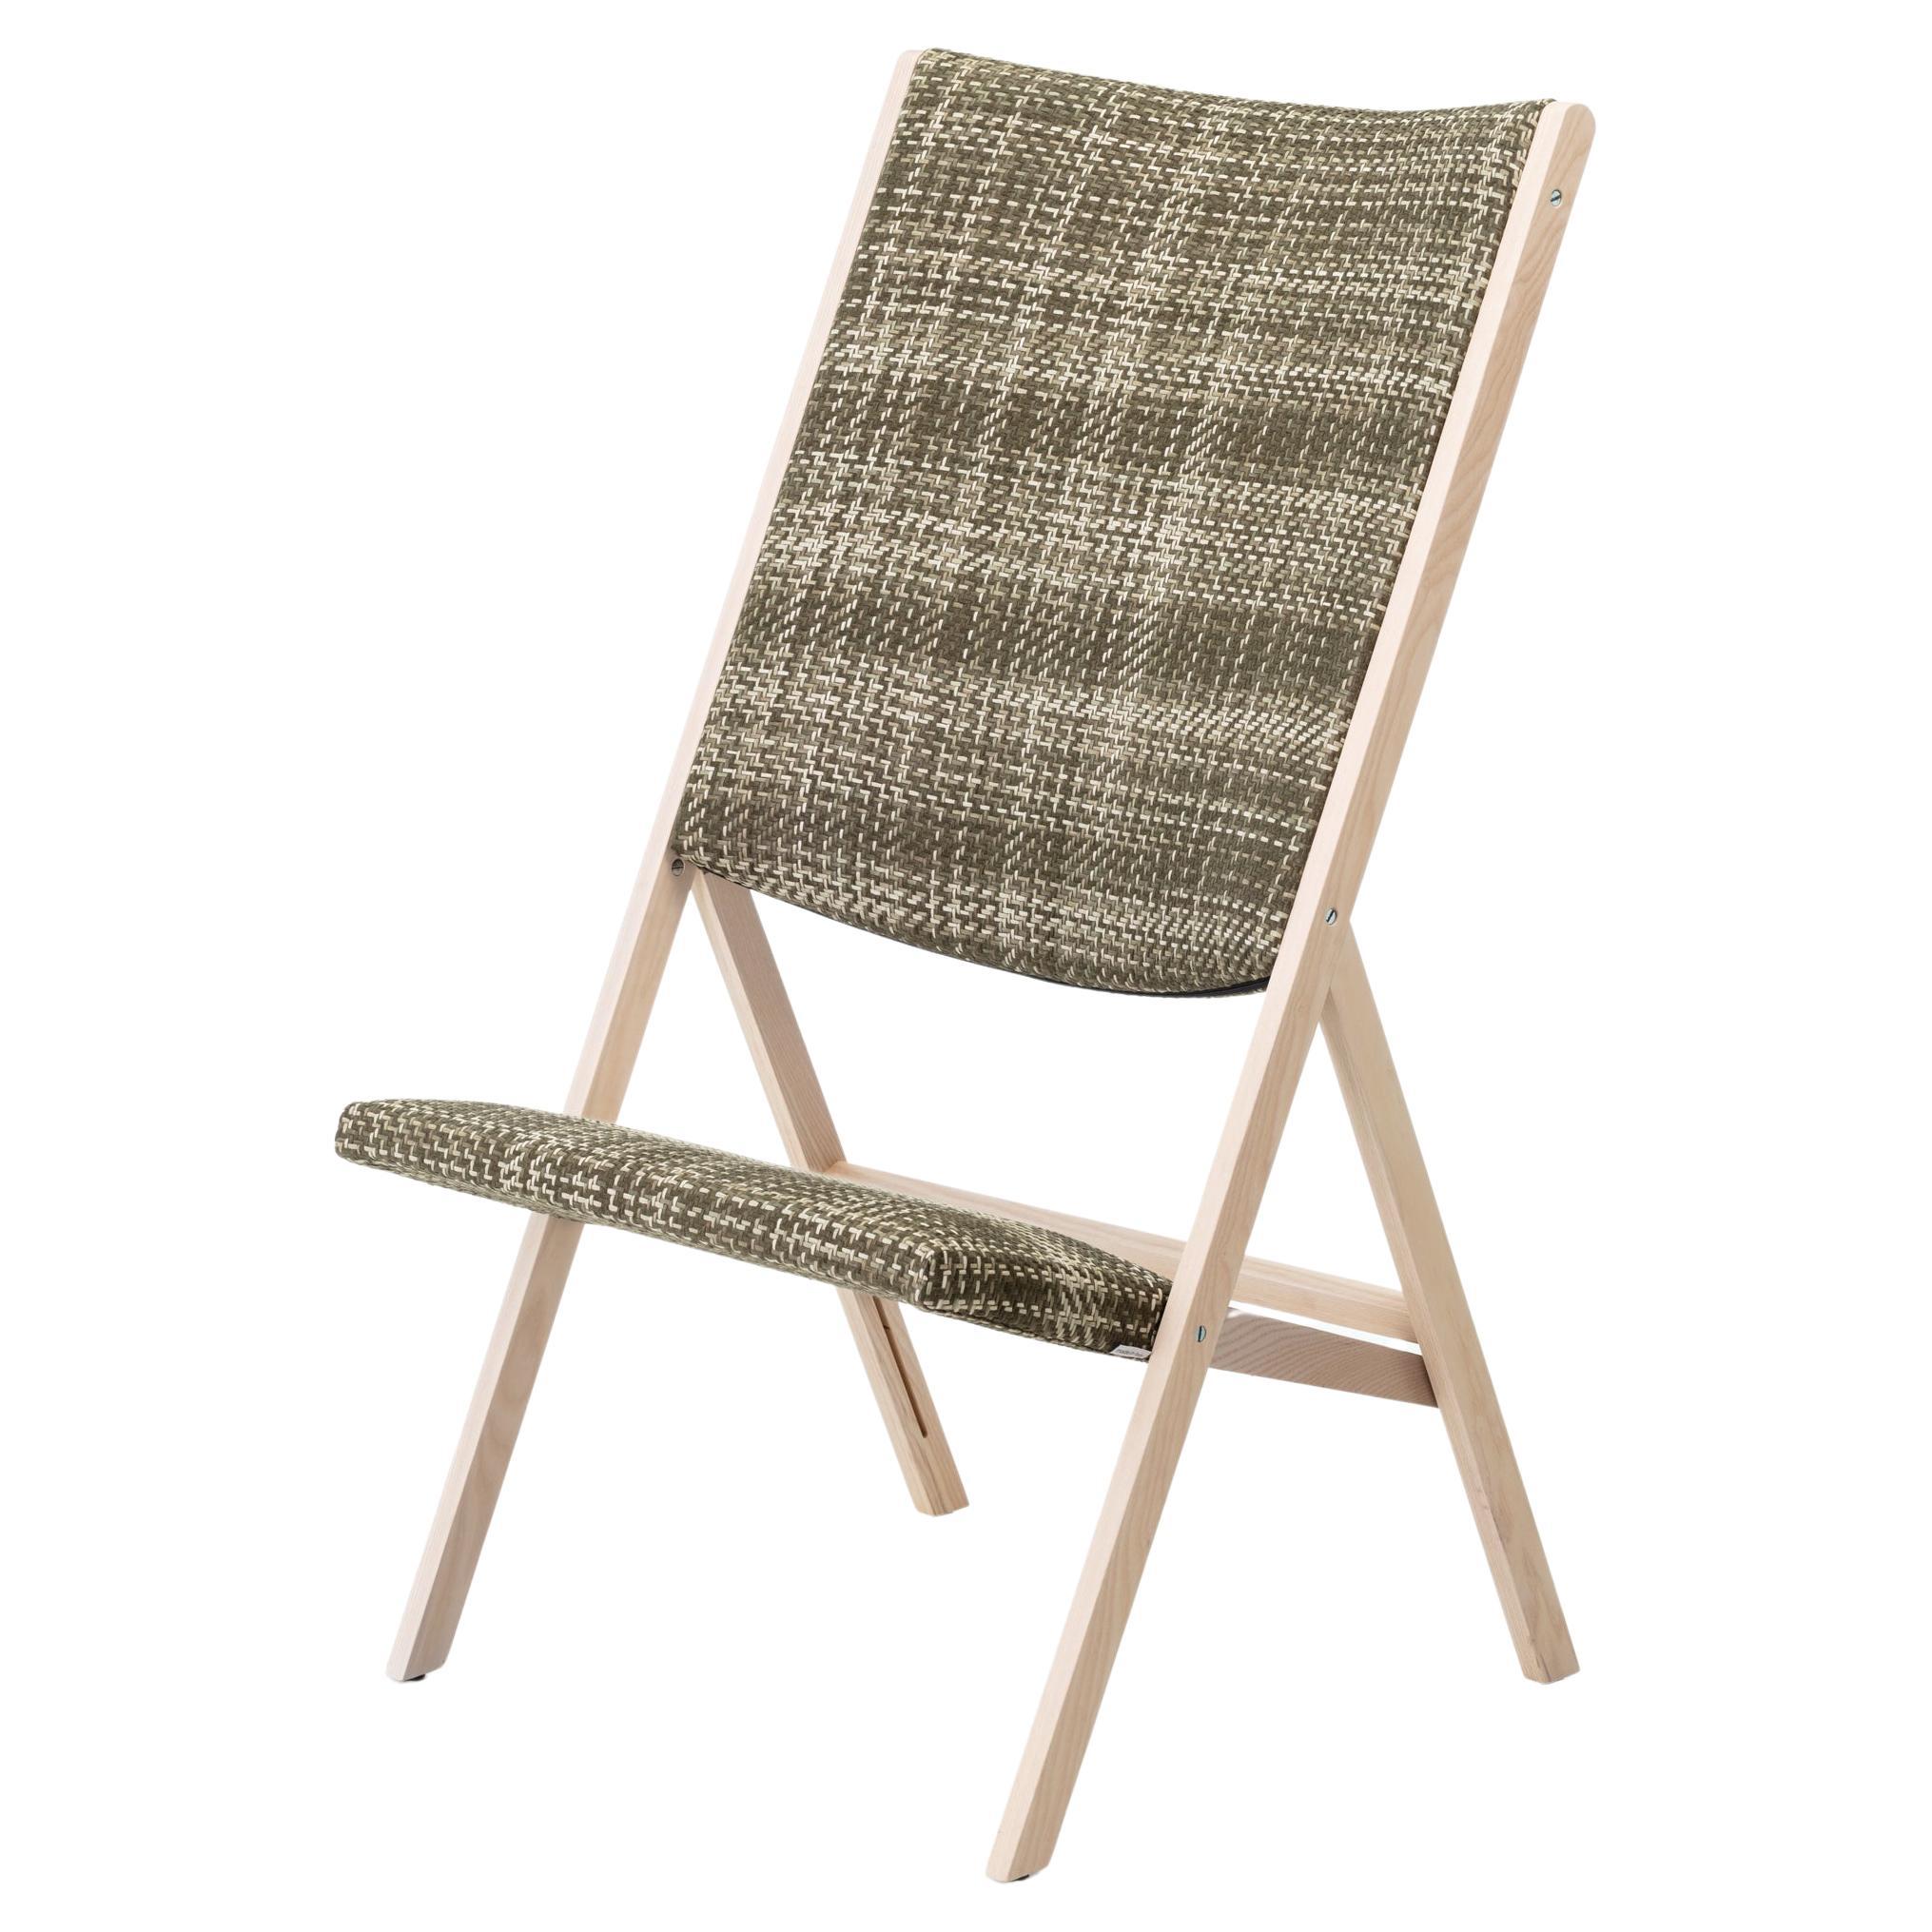 Gio Ponti by Molteni - Folding Chair - Discontinued Edition For Sale